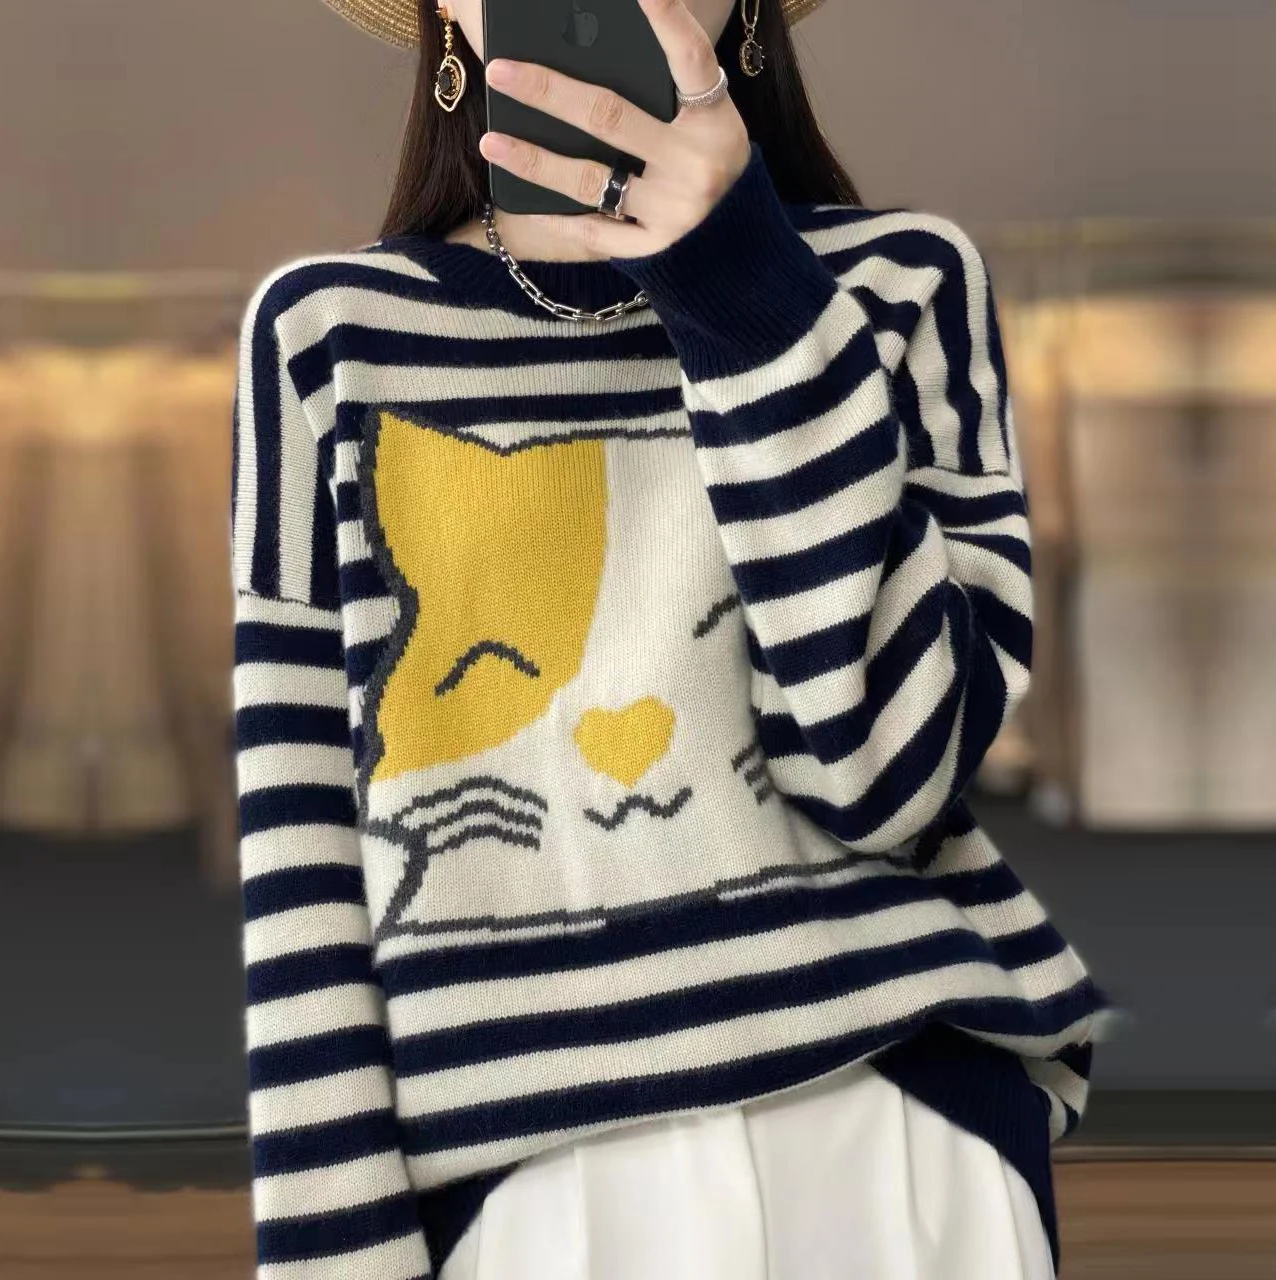 100 Merino Woolen Sweater Women's Crew Neck Stripe Pullover Autumn and Winter New Fashion Embroidery Stripe Top Loose Large Size